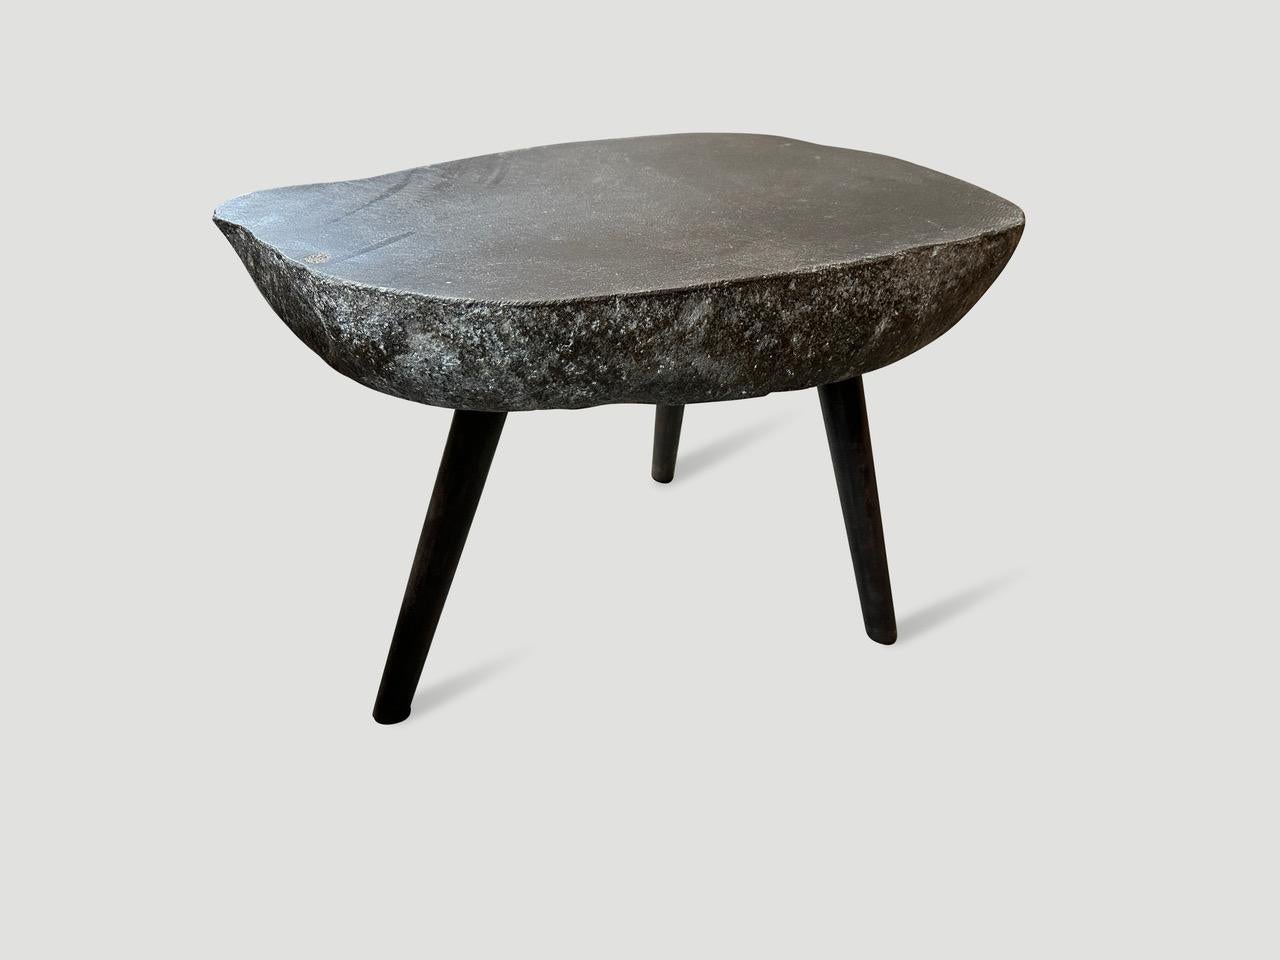 Organic Modern Andrianna Shamaris River Stone Side Table For Sale